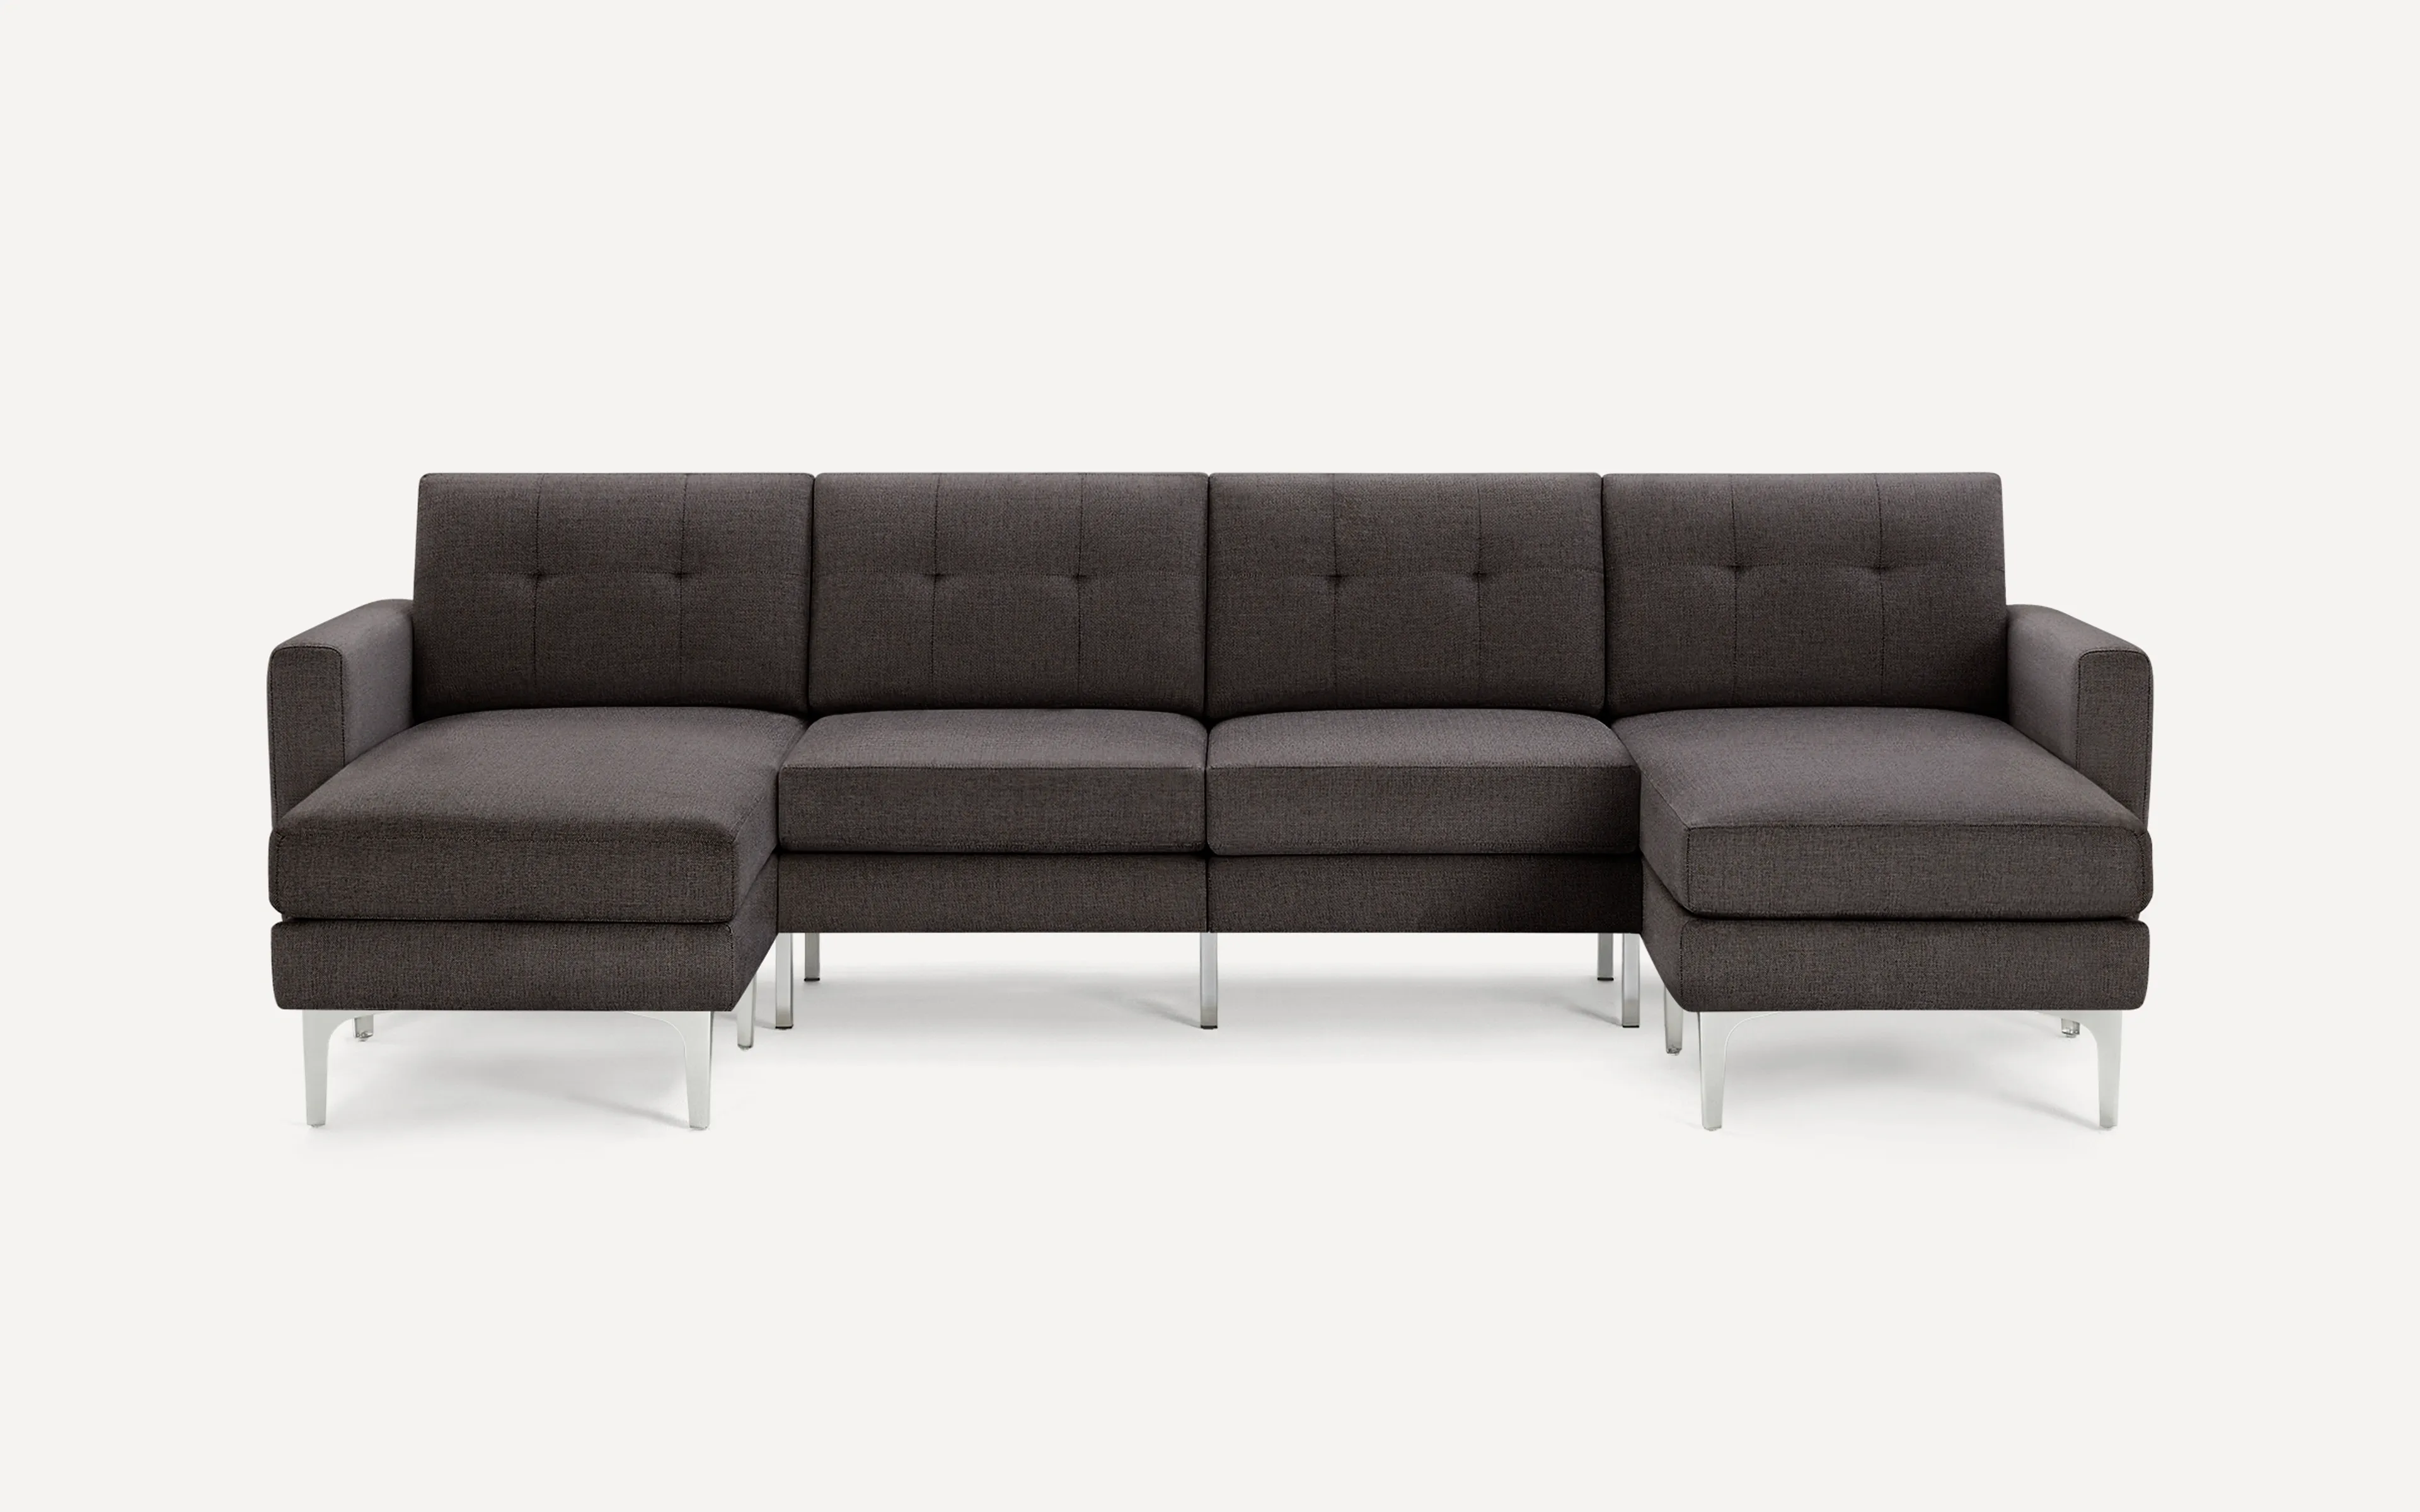 Original Nomad King Sofa in Charcoal Fabric